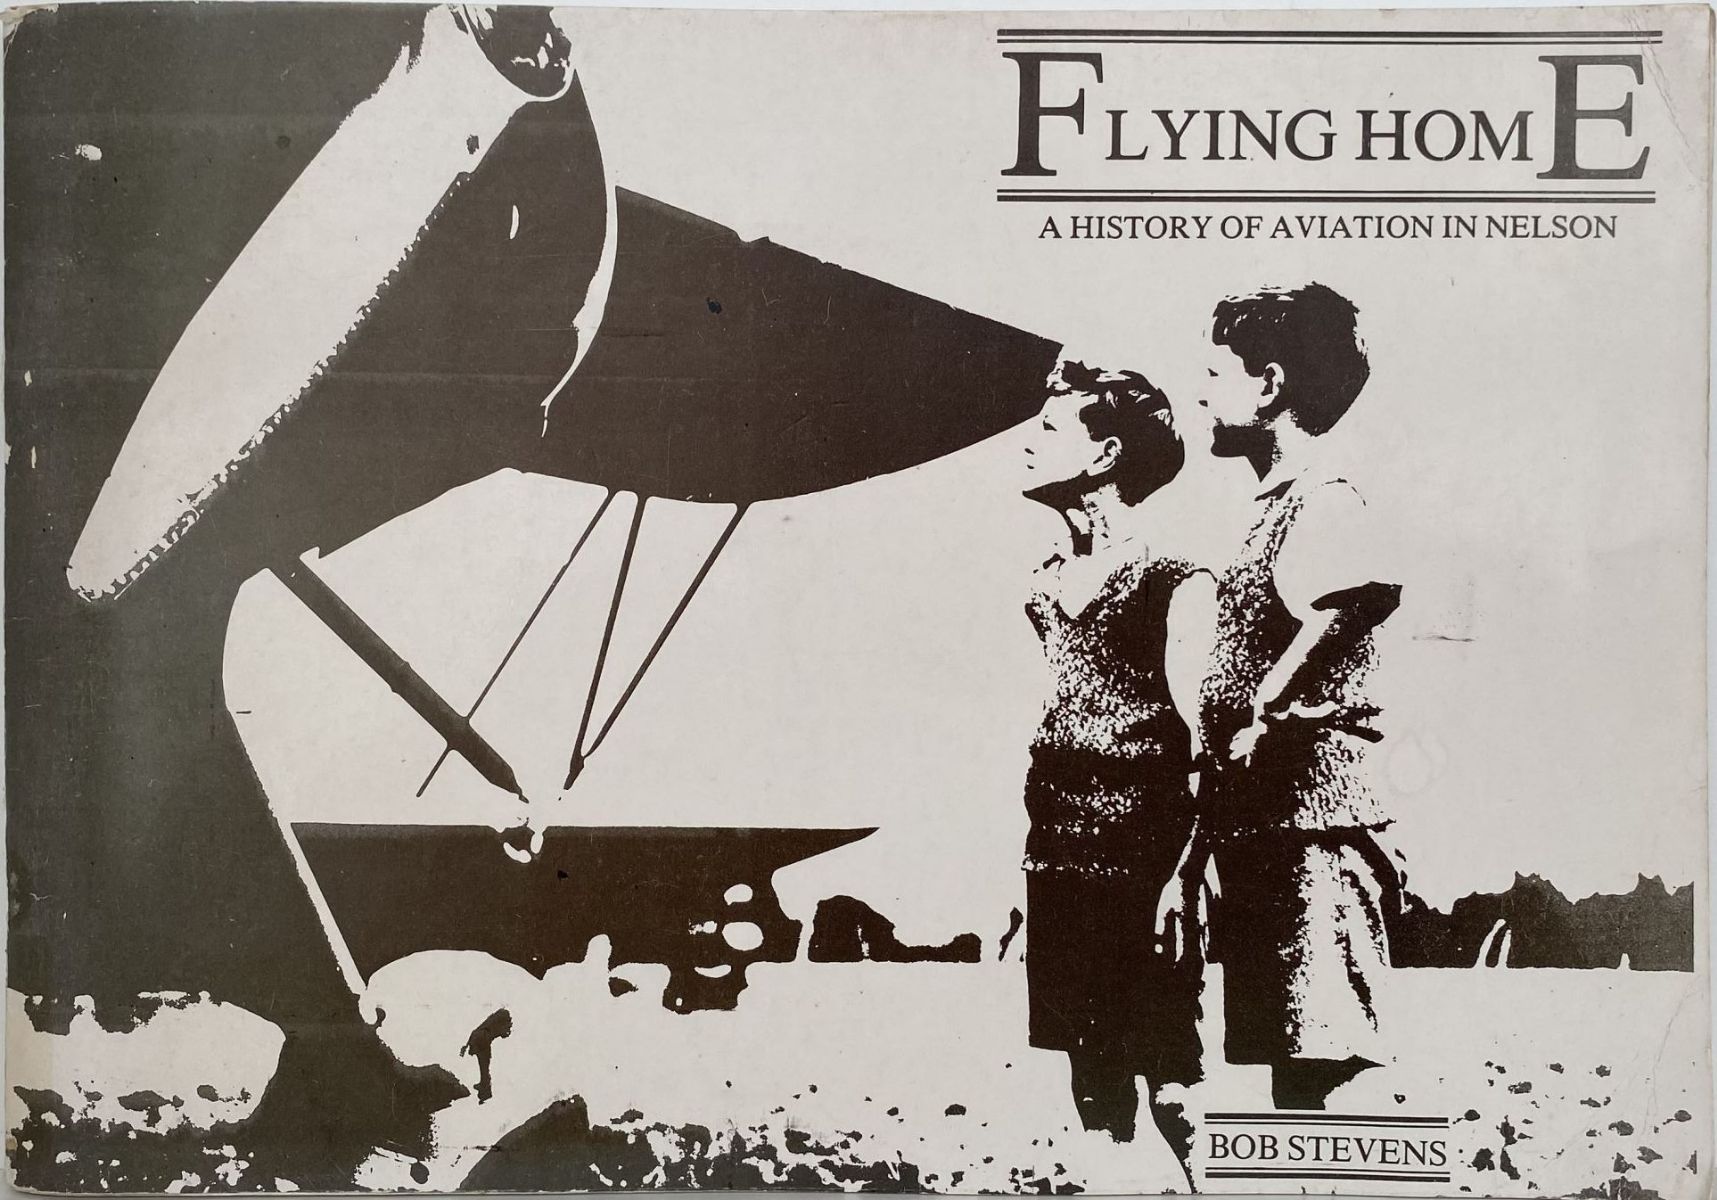 FLYING HOME: A History of Aviation in Nelson